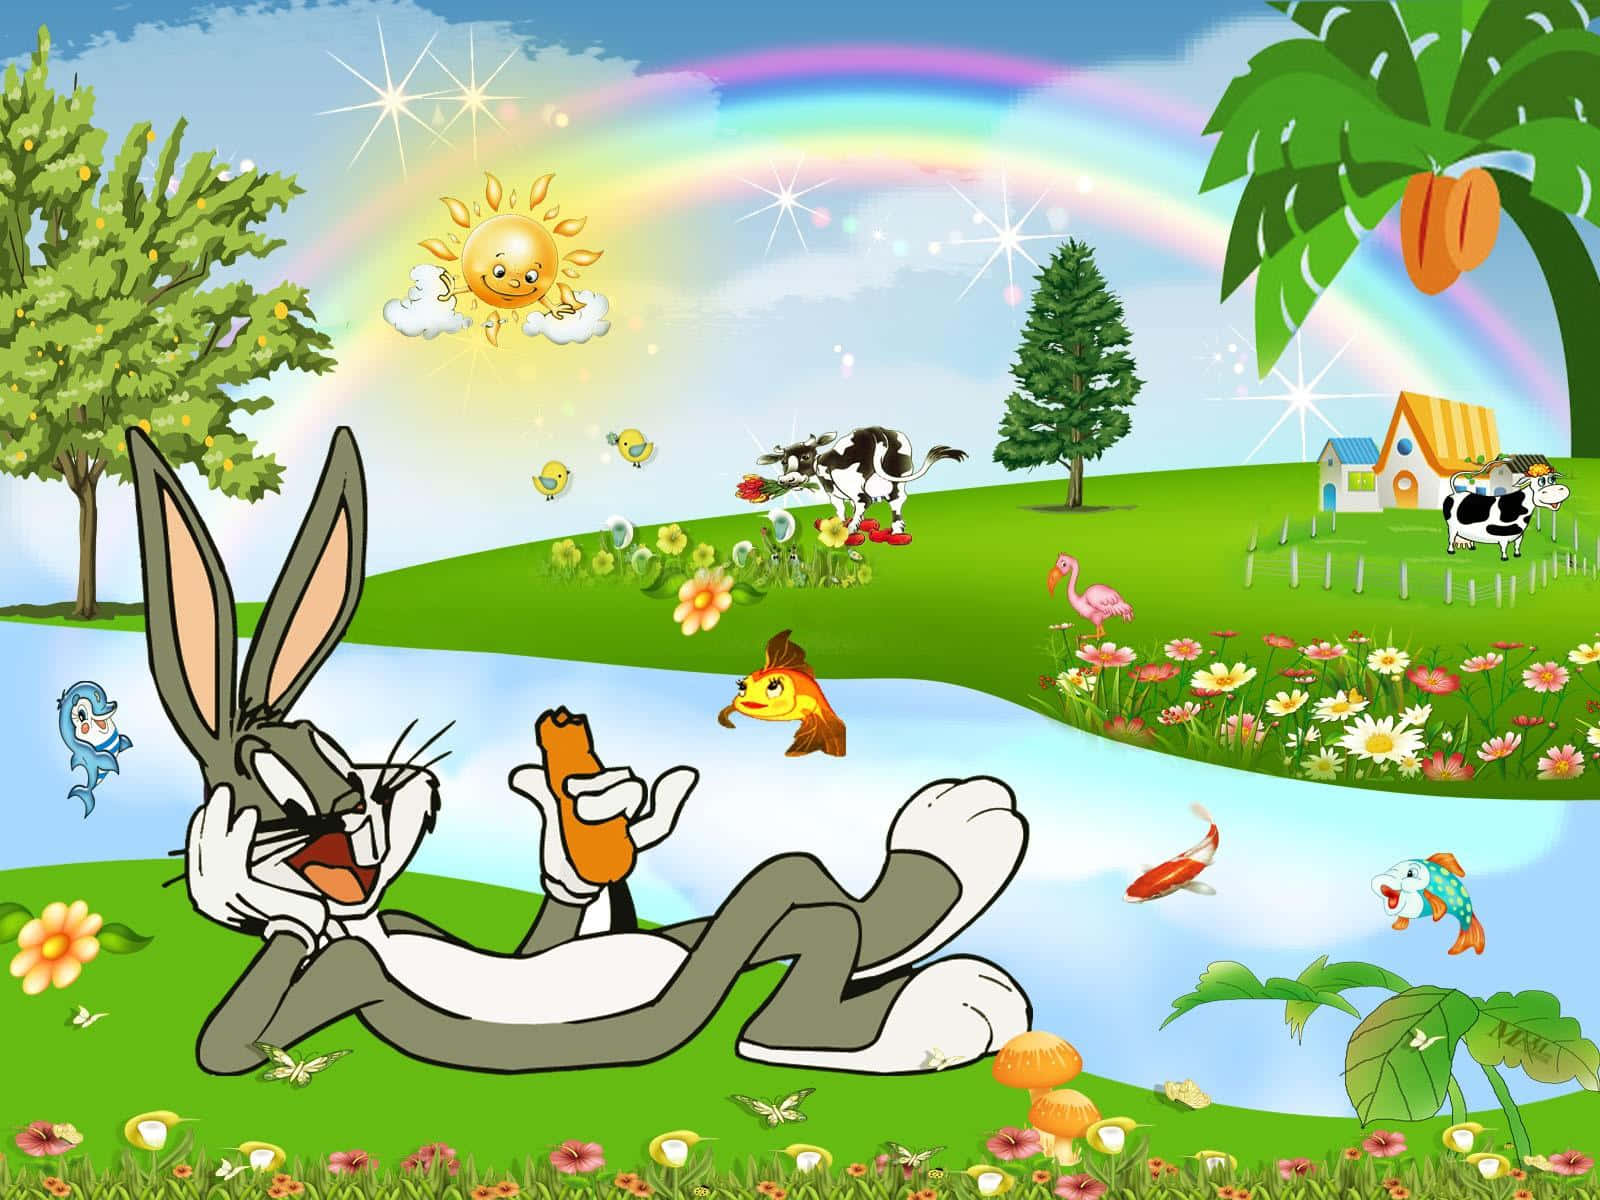 Cool Bugs Bunny Eating Carrots With Rainbow Wallpaper